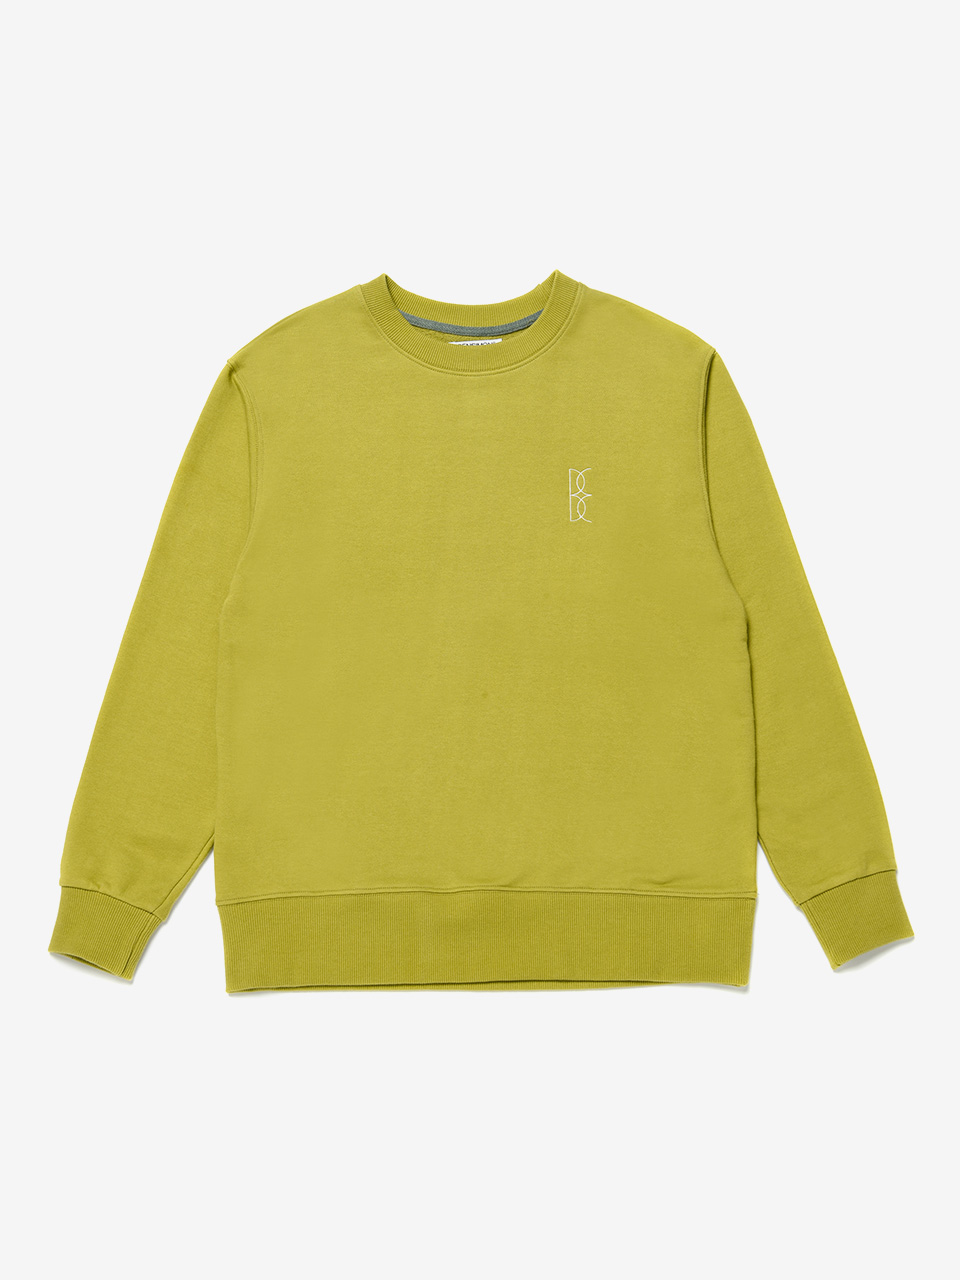 Over Sweat Shirt_Olive